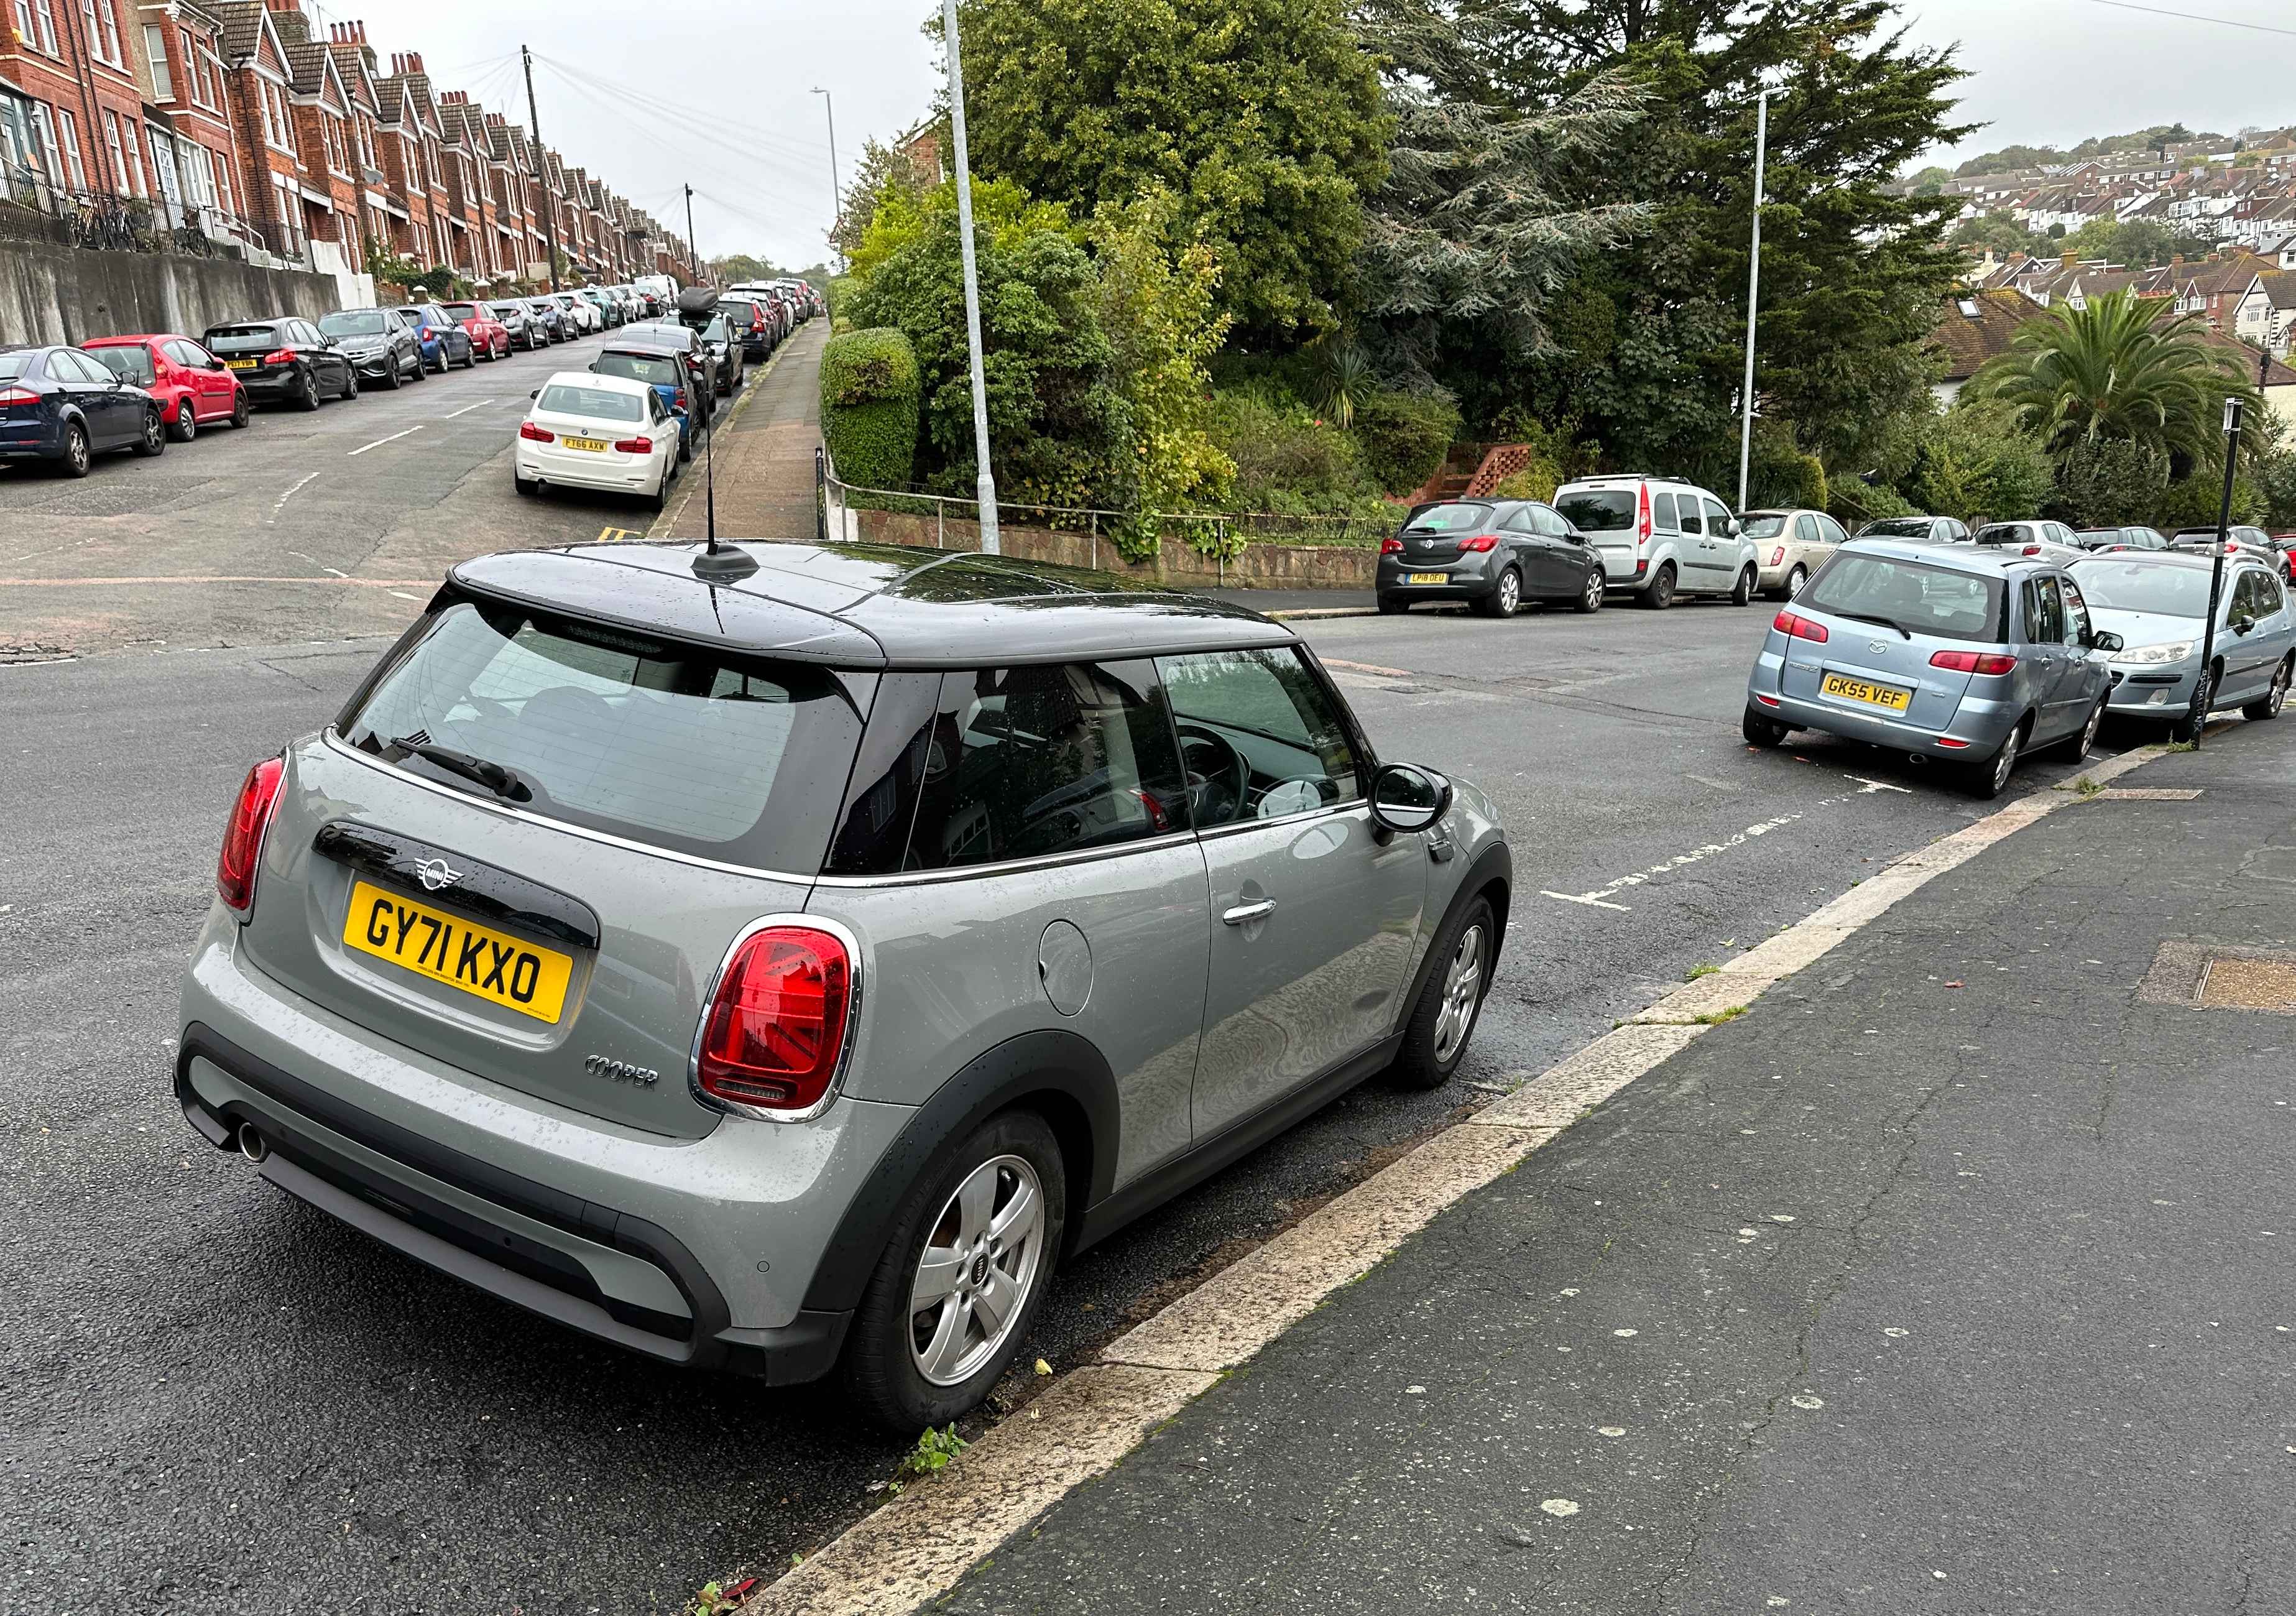 Photograph of GY71 KXO - a Grey Mini Cooper parked in Hollingdean by a non-resident who uses the local area as part of their Brighton commute. The second of three photographs supplied by the residents of Hollingdean.